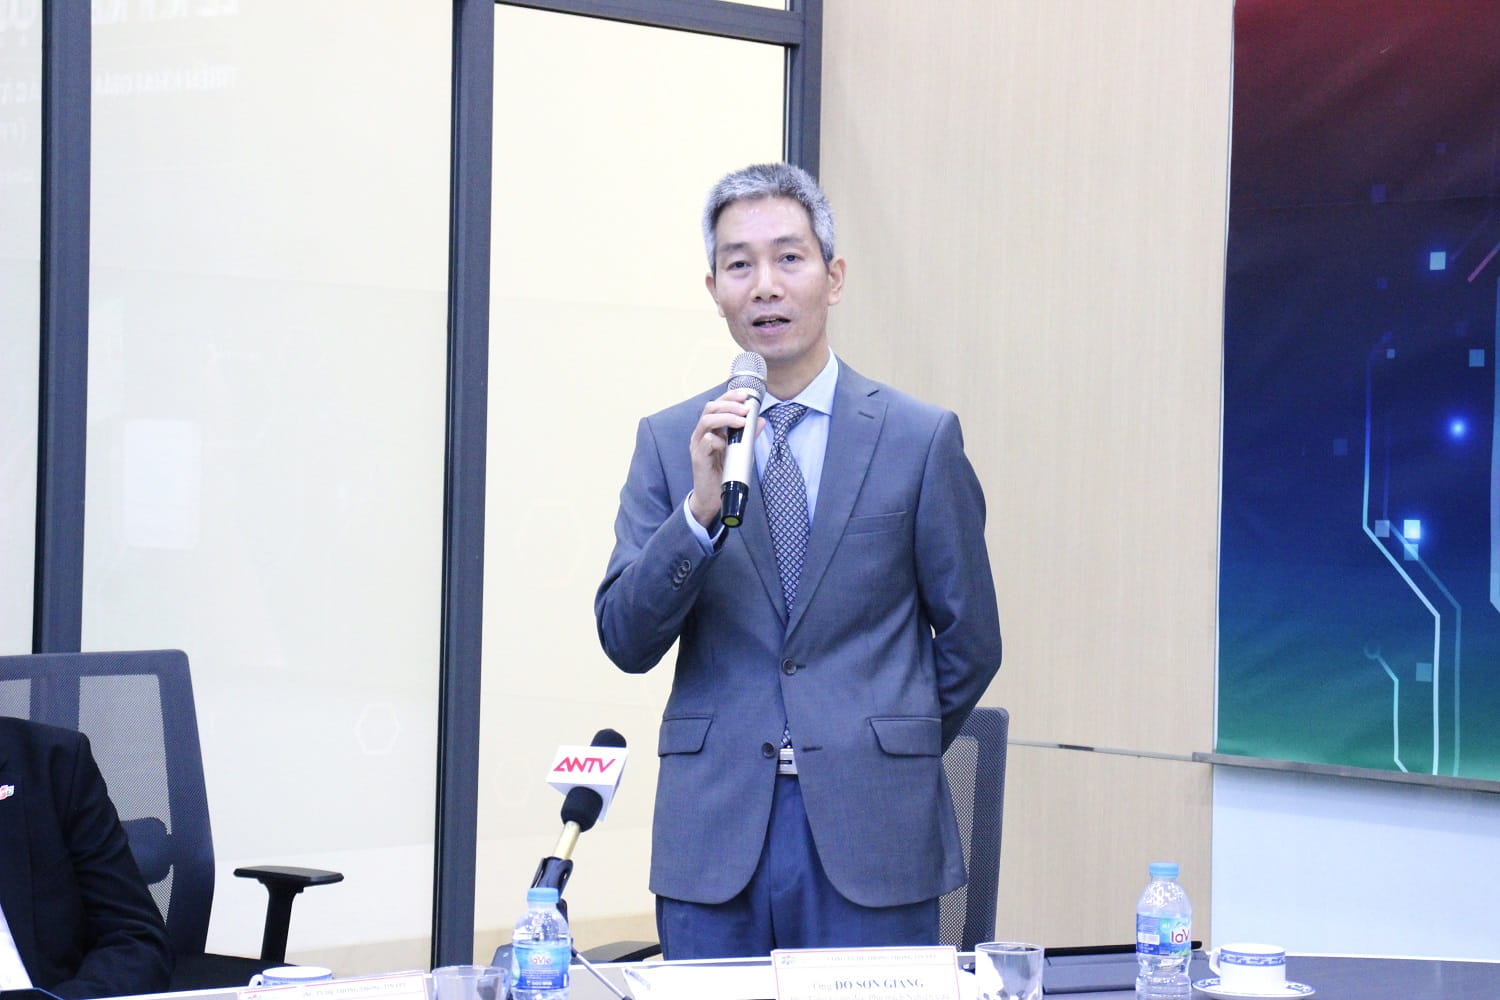 Mr. Do Son Giang - Deputy CEO in charge of R&D at FPT IS - affirmed that FPT IS would go along with VietCredit for successful cooperation.